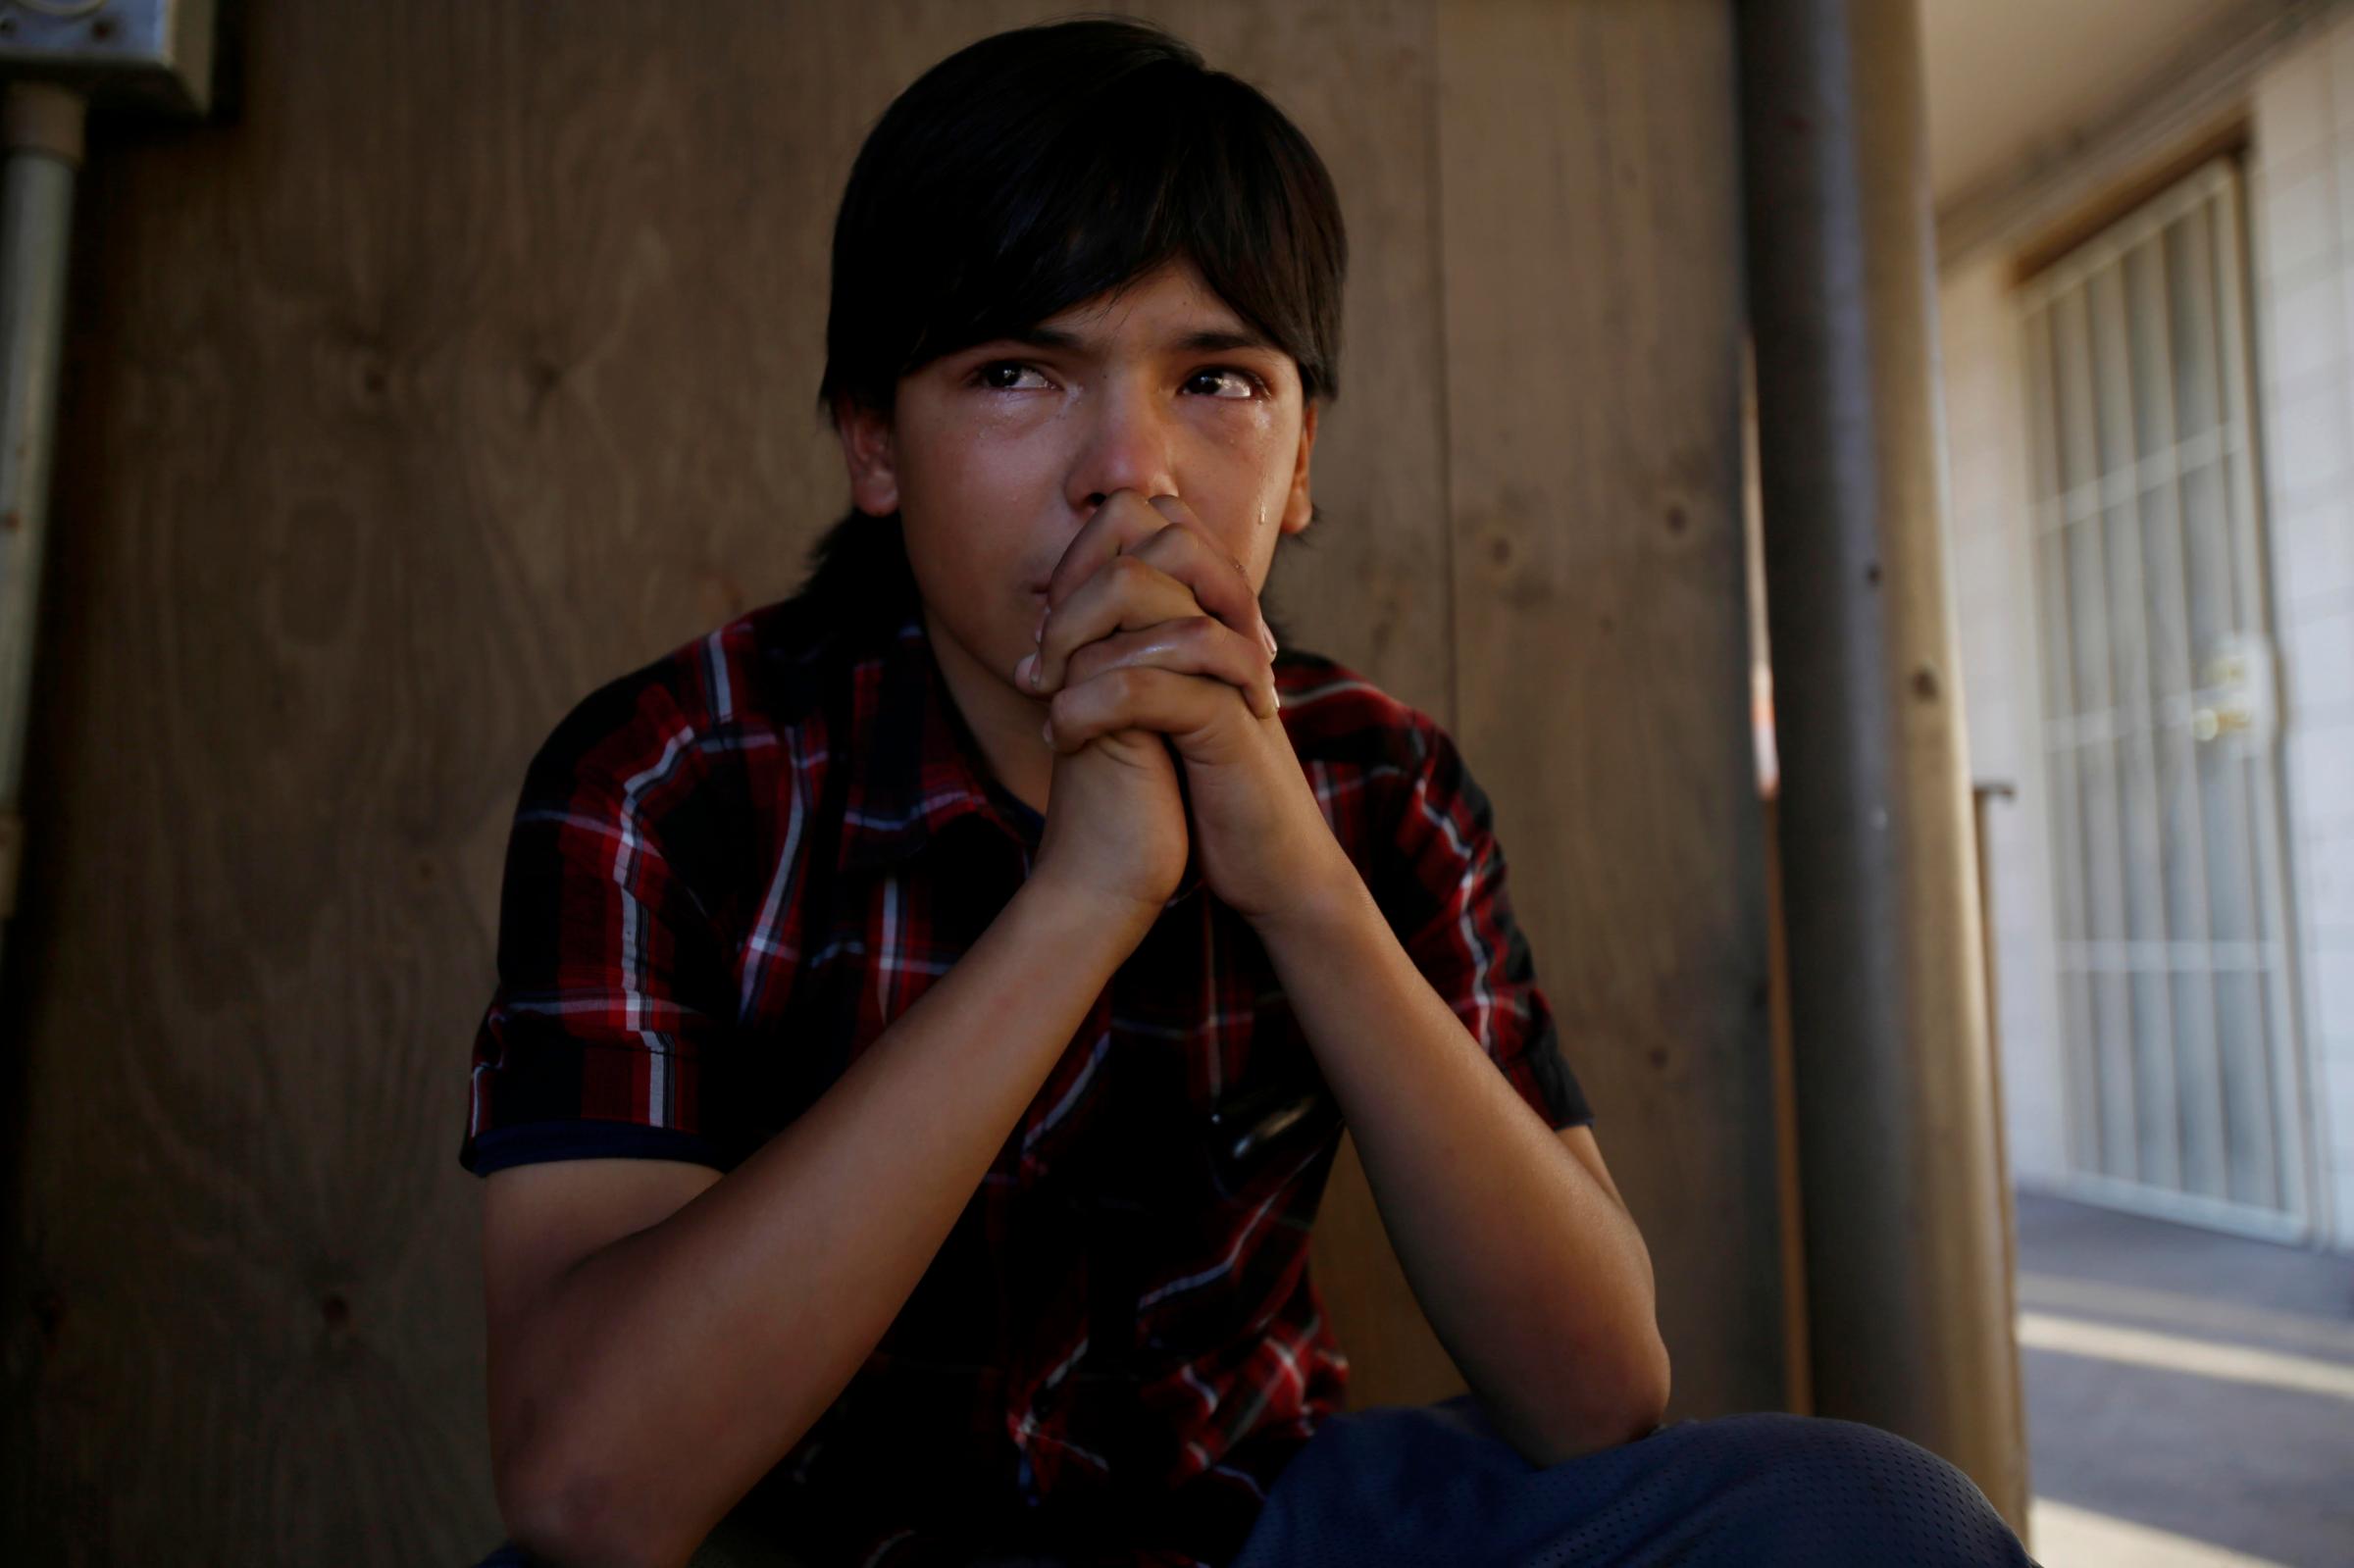 FEBRUARY 11, 2015:  In tears, Eddie Martinez, 14, sits under the stairwell crying at the  Country Inn, in San Bernardino, CA, February 11, 2015. He is trying to help his friend Breanna. Eddie mother Noreen Gutierrez is in jail, and he wonders between a near by apartment, and the motel. He stuffed two sheets of notebook paper into his backpack. He had written, "I’m losing everything in my life for good the only thing I haven’t lost yet is my life but I hope I’ll lose it soon cause I can’t take it anymore." That night he was sitting outside around 11 pm, when the police pulled up, below Breanna’s room. Social workers followed. Breanna, her siblings, along with Eddie,  were taken into social services. Eddie's is now with his father.  “I Wonder if anyone would miss me when I’m Gone,” Eddie later posted on Facebook. He got three “likes” but no comments.  (Francine Orr/ Los Angeles Times)